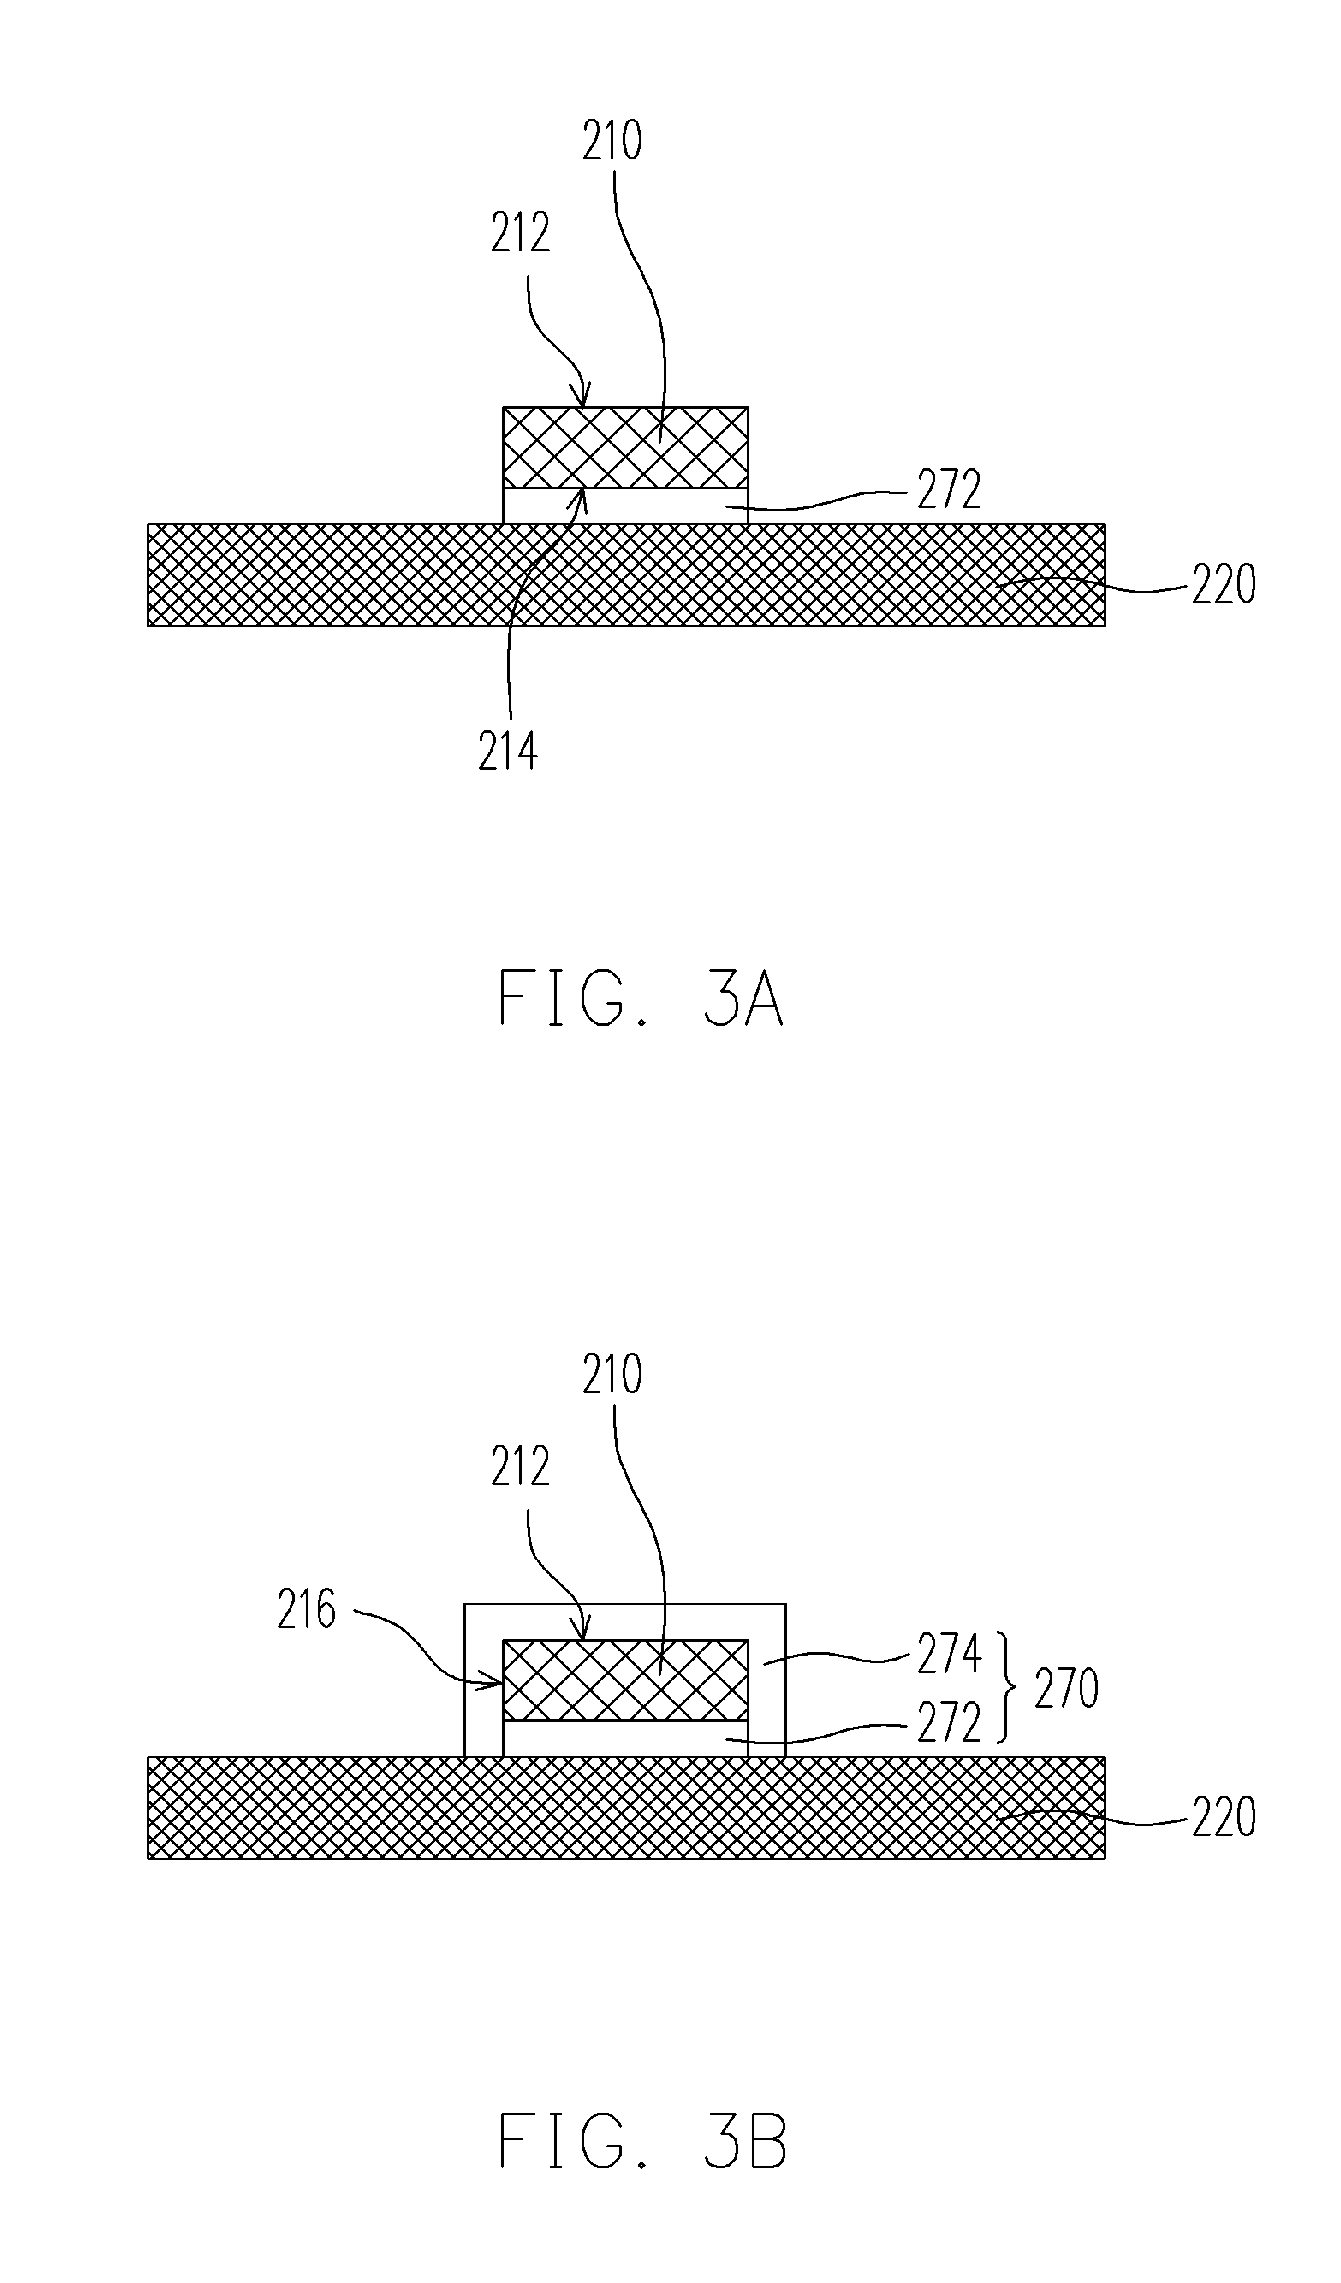 Structure and process of chip package